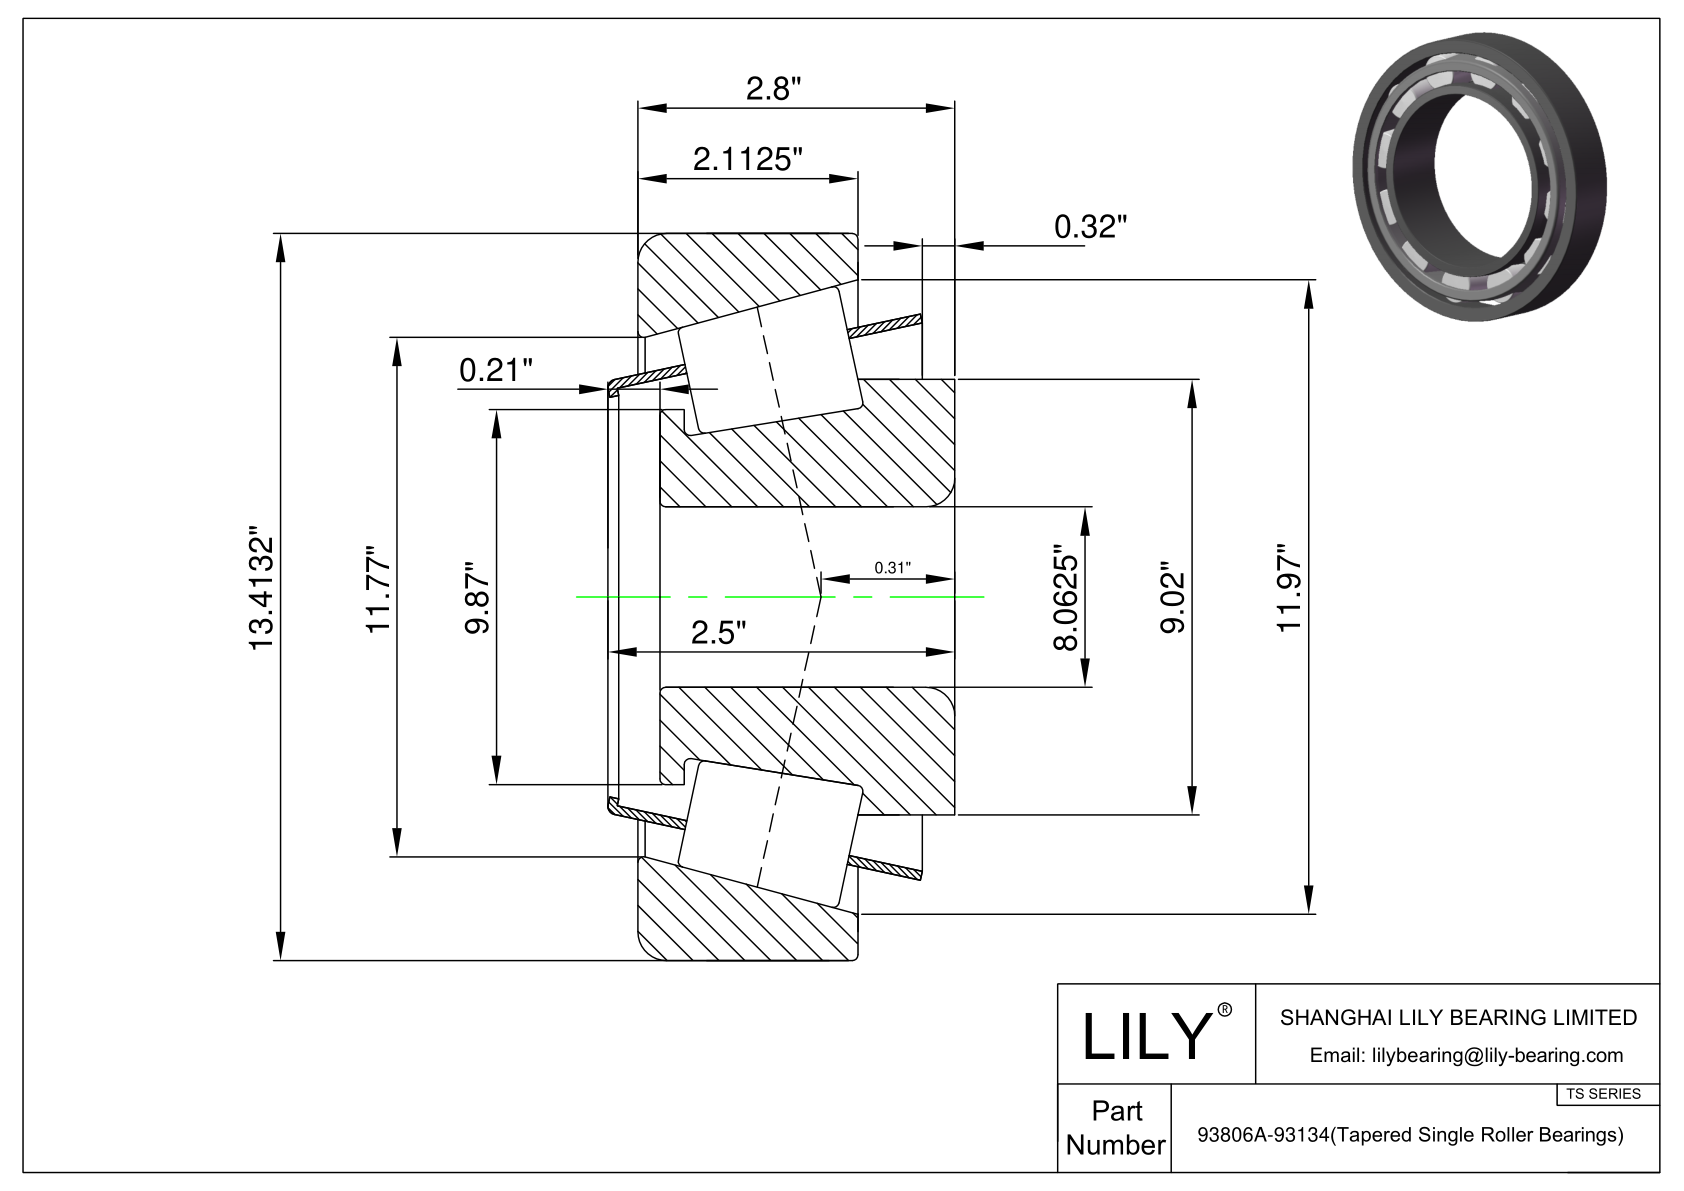 93806A-93134 TS (Tapered Single Roller Bearings) (Imperial) cad drawing